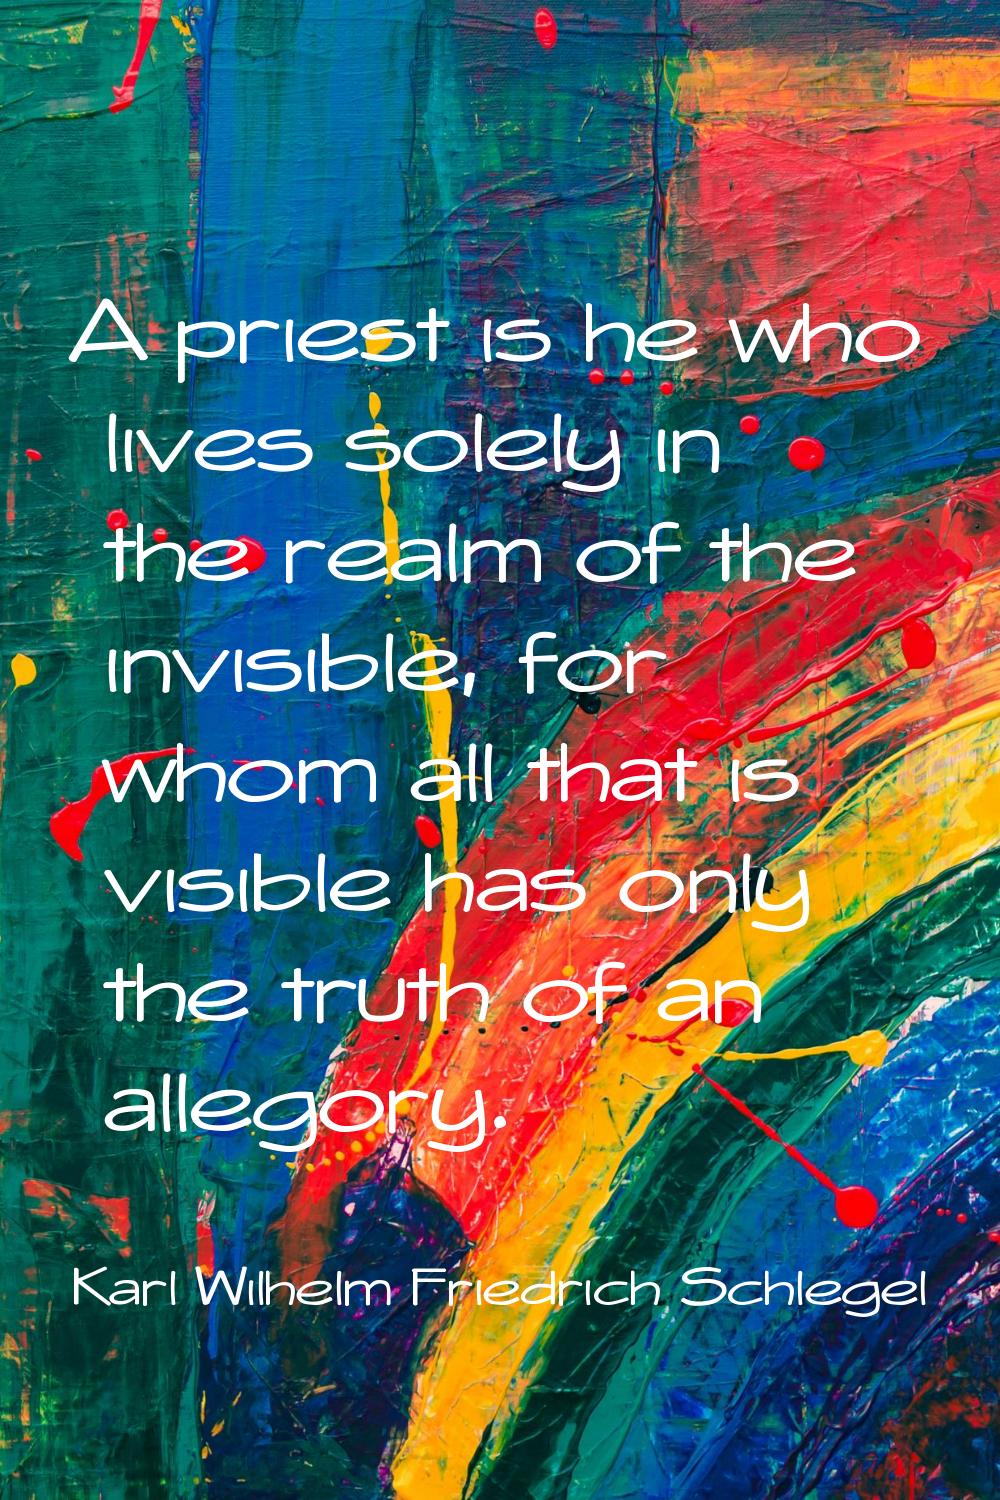 A priest is he who lives solely in the realm of the invisible, for whom all that is visible has onl